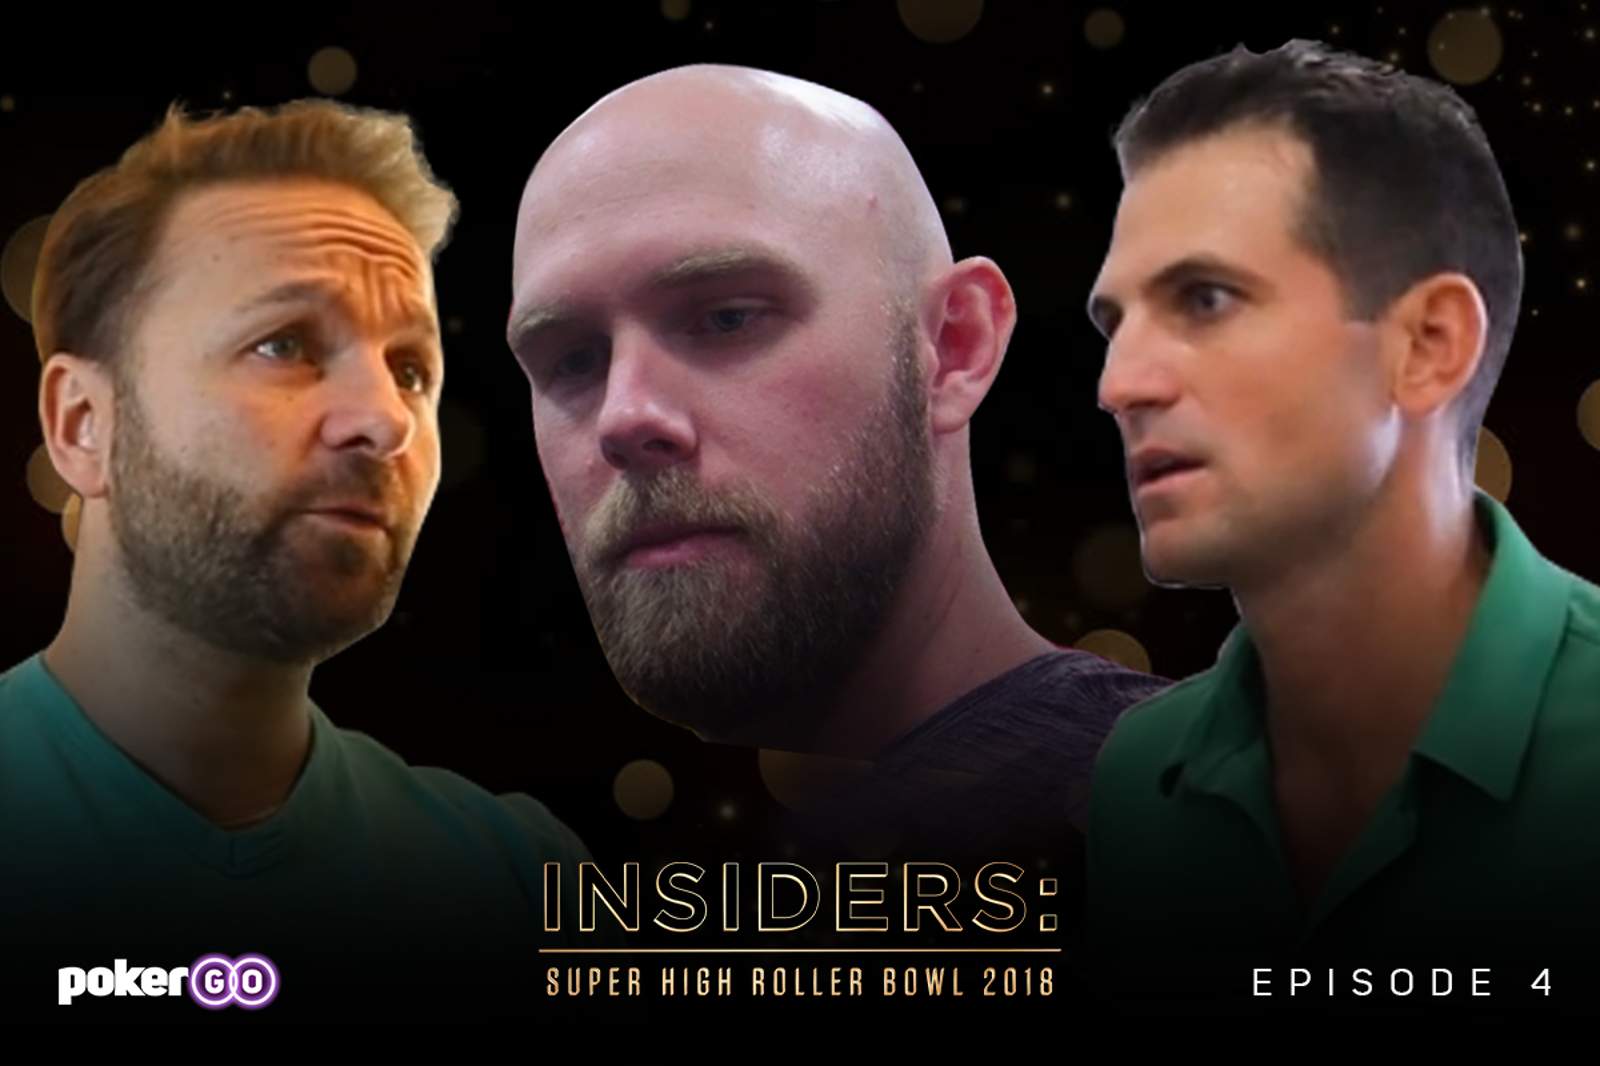 INSIDERS: New Rivalries Appear on PokerGO